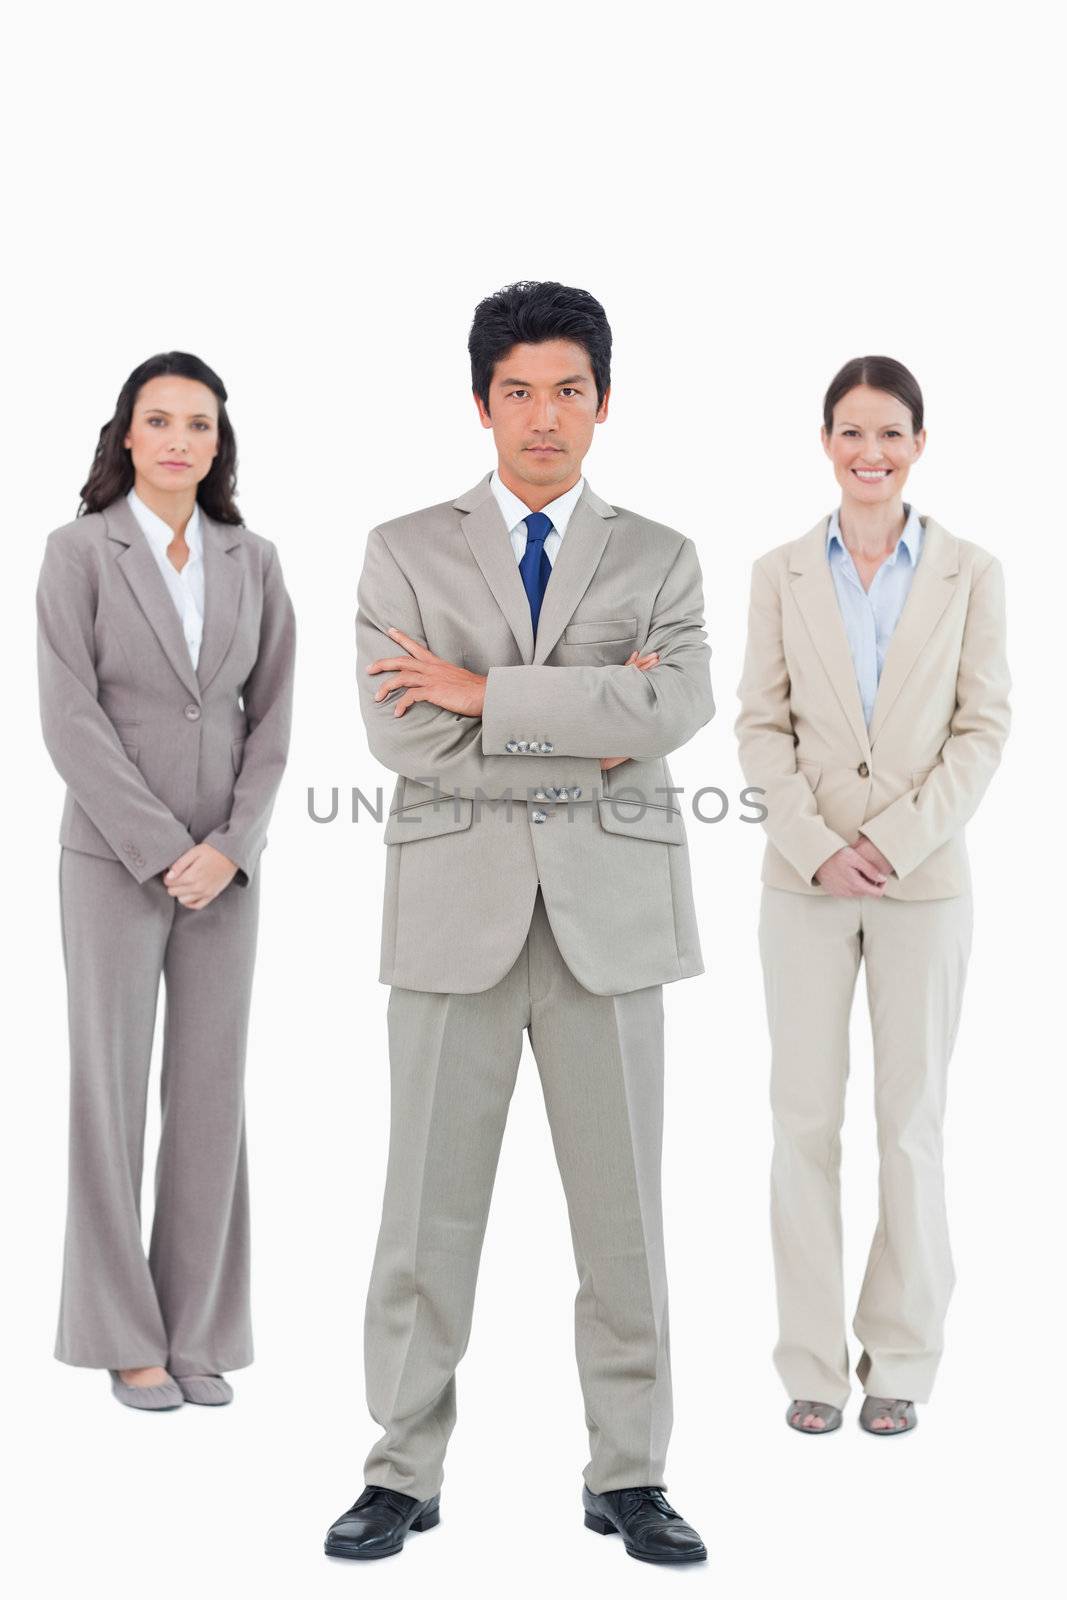 Confident businessman with his team behind him against a white background